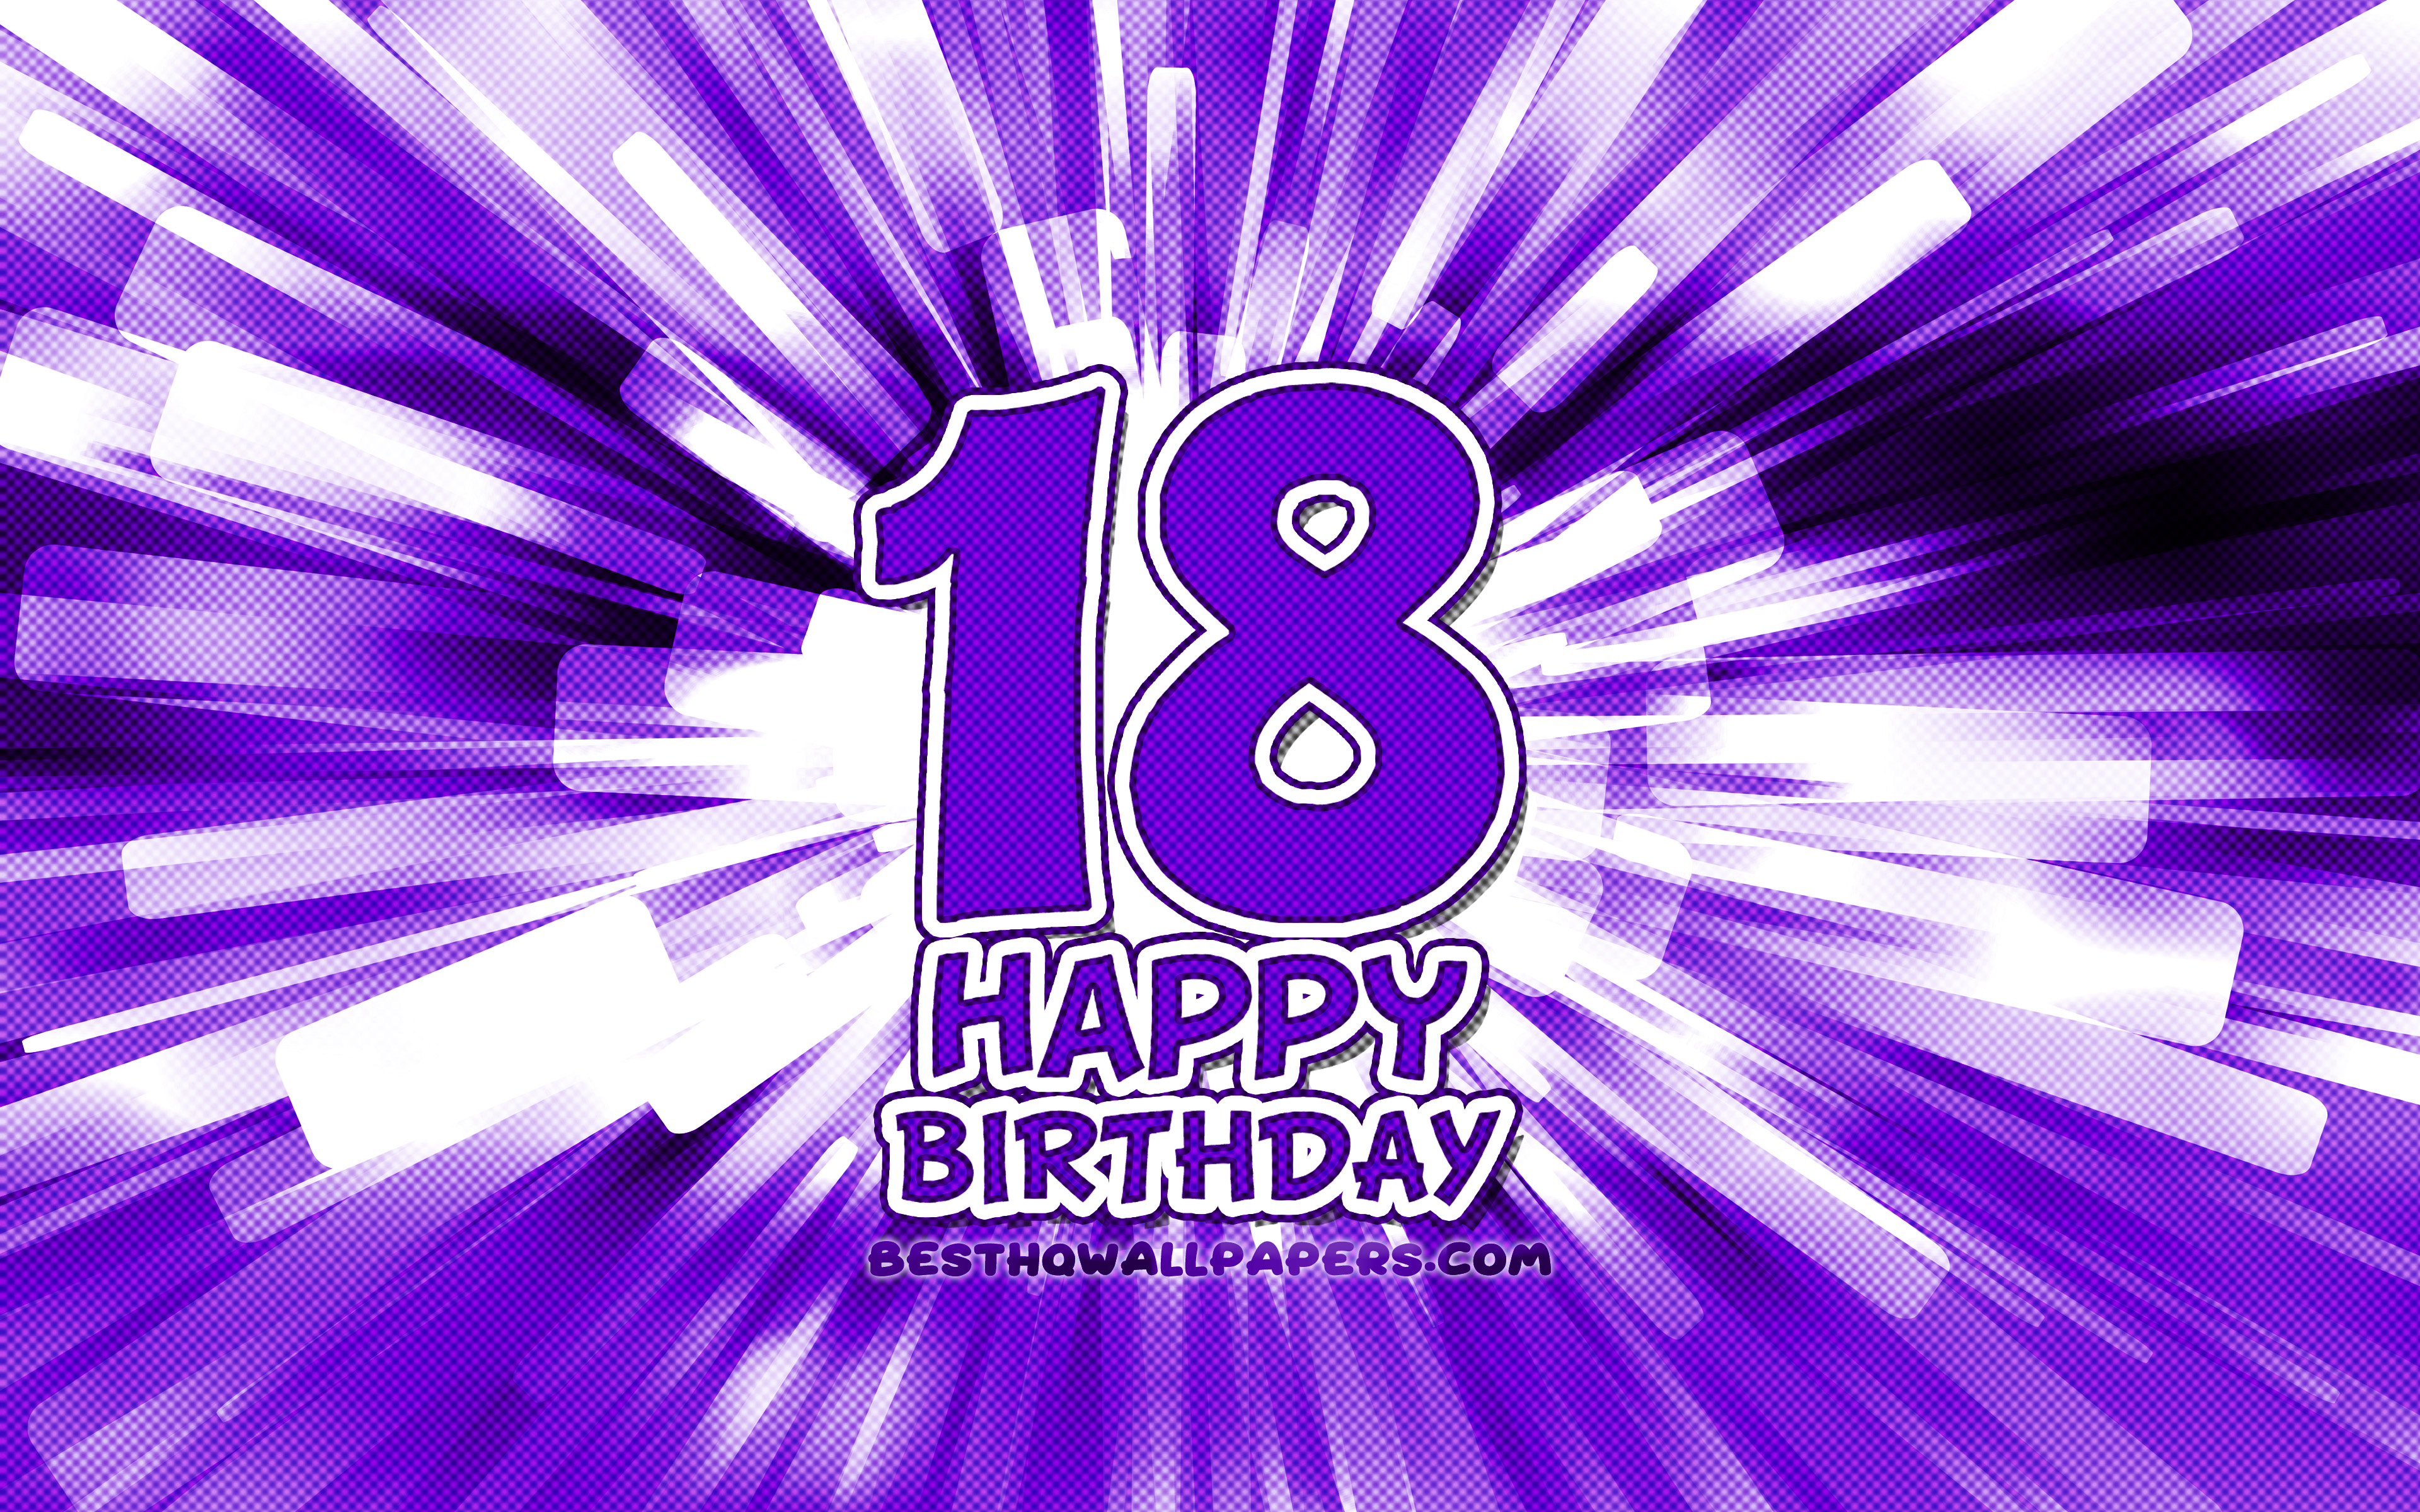 4569 18th Birthday Background Images Stock Photos  Vectors  Shutterstock